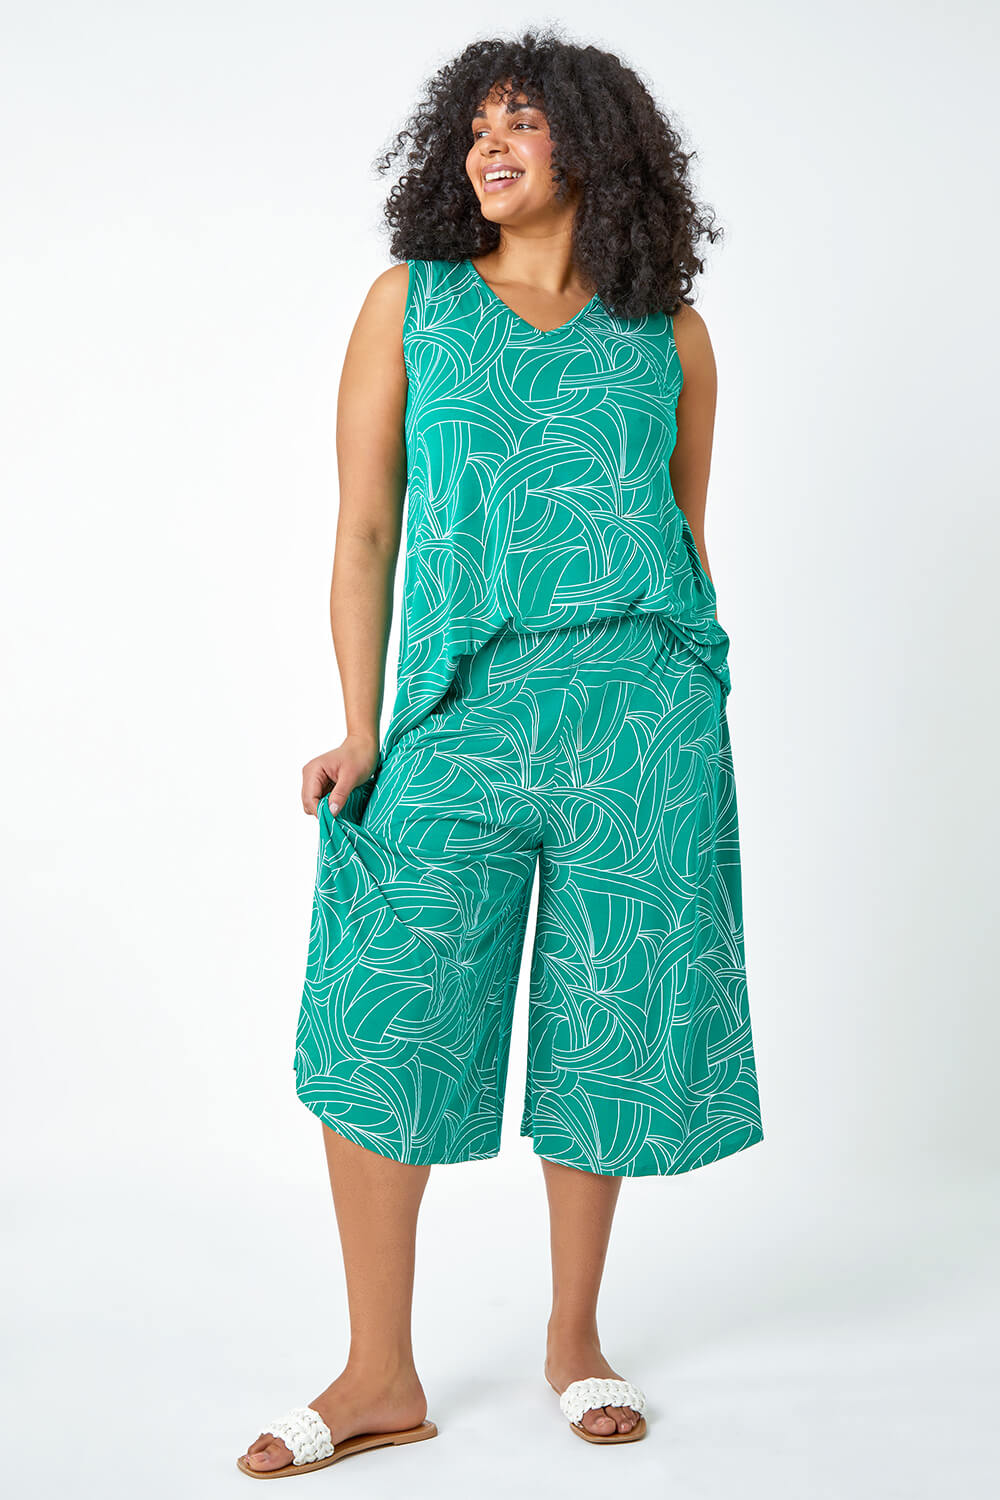 Green Curve Abstract Swirl Stretch Vest Top, Image 4 of 6